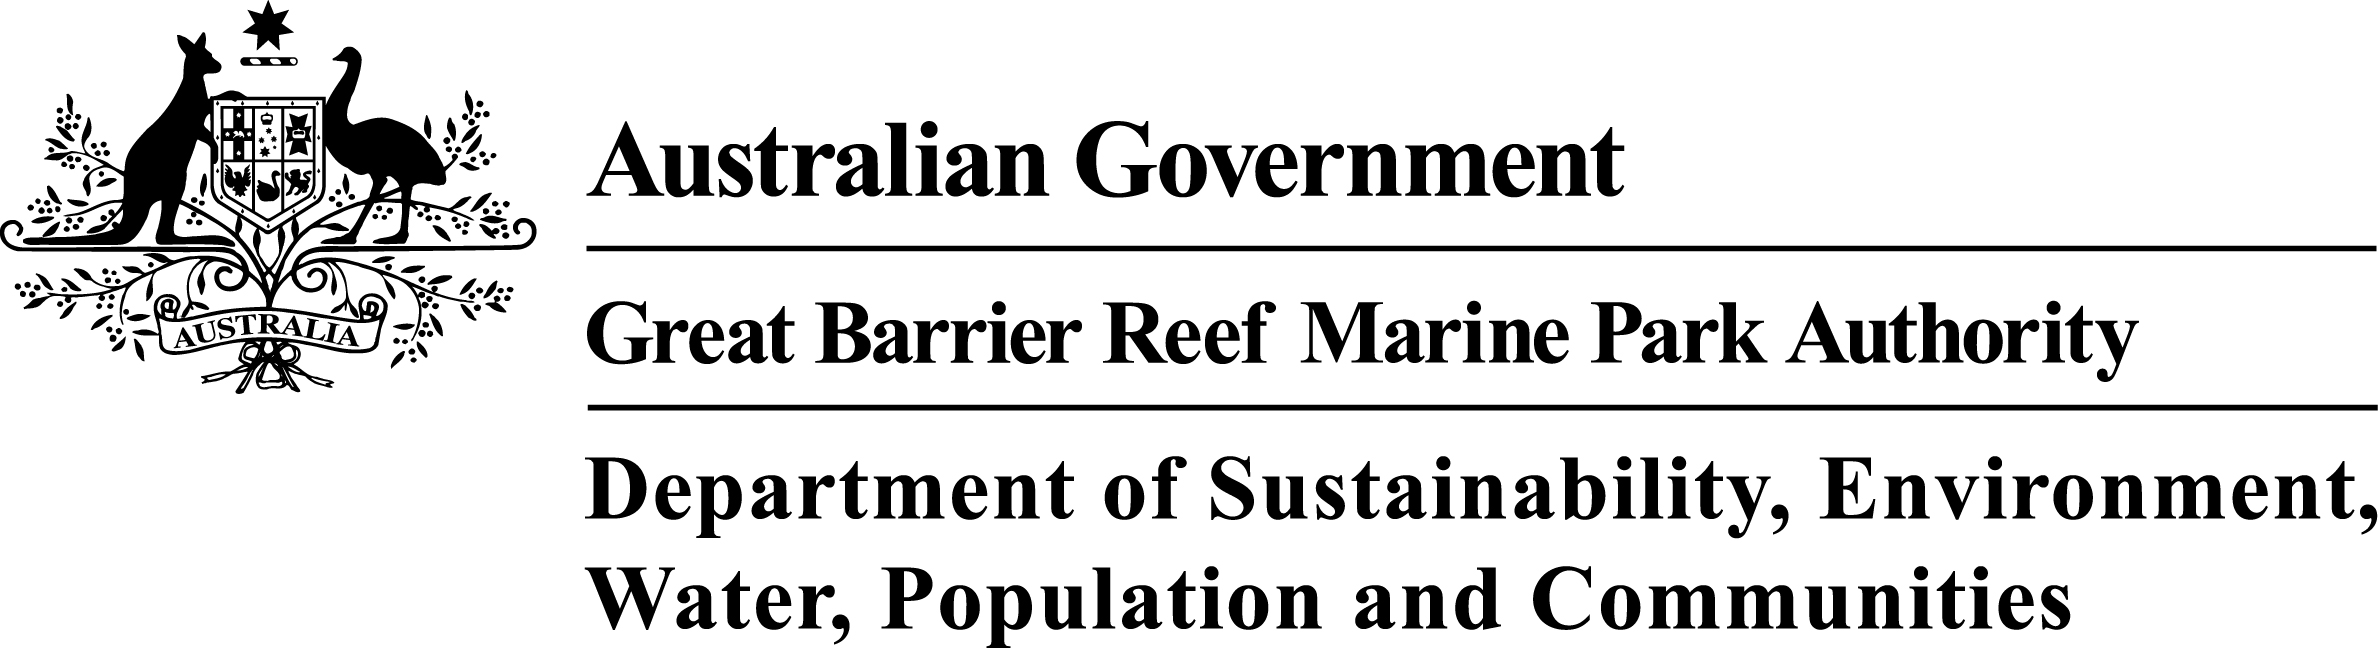 combined australian government logo for great barrier reef marine park authority and department of sustainability, environment, water, population and communities